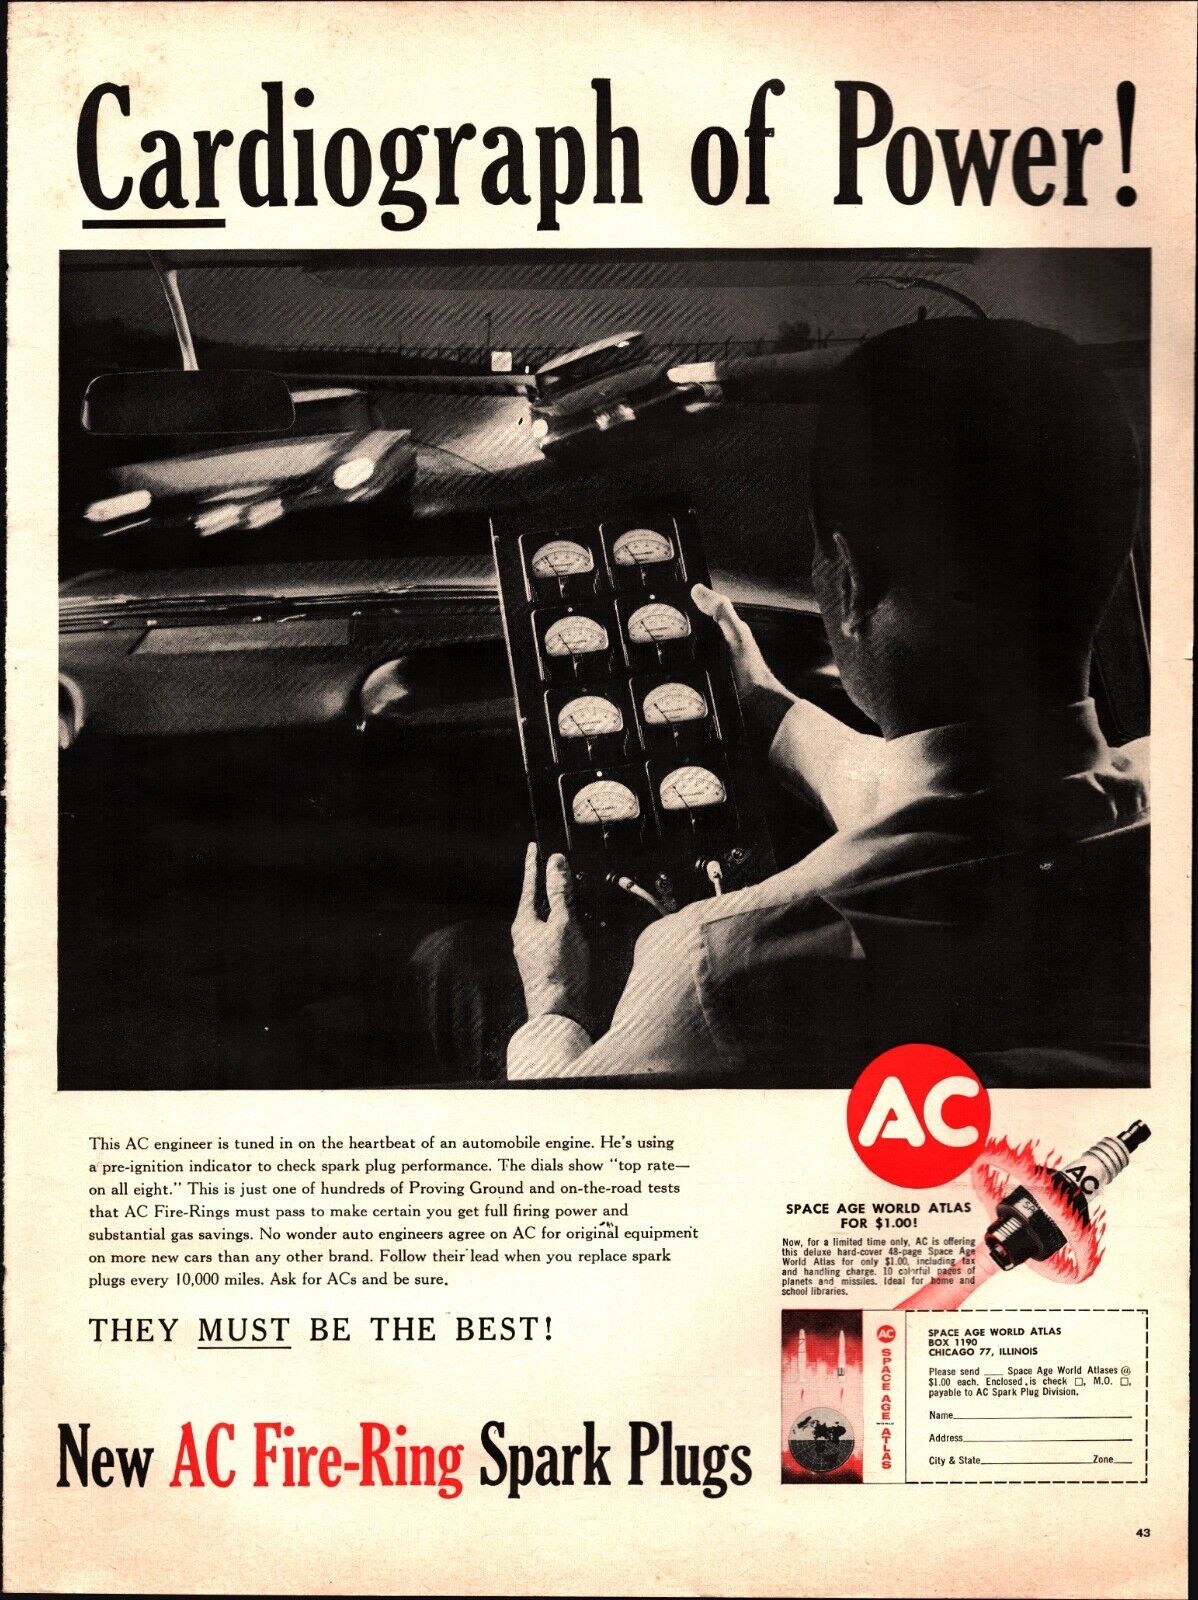 Life Magazine Ad AC Fire-Ring SPARK PLUGS 1960 Ad Cardiograph of power b9